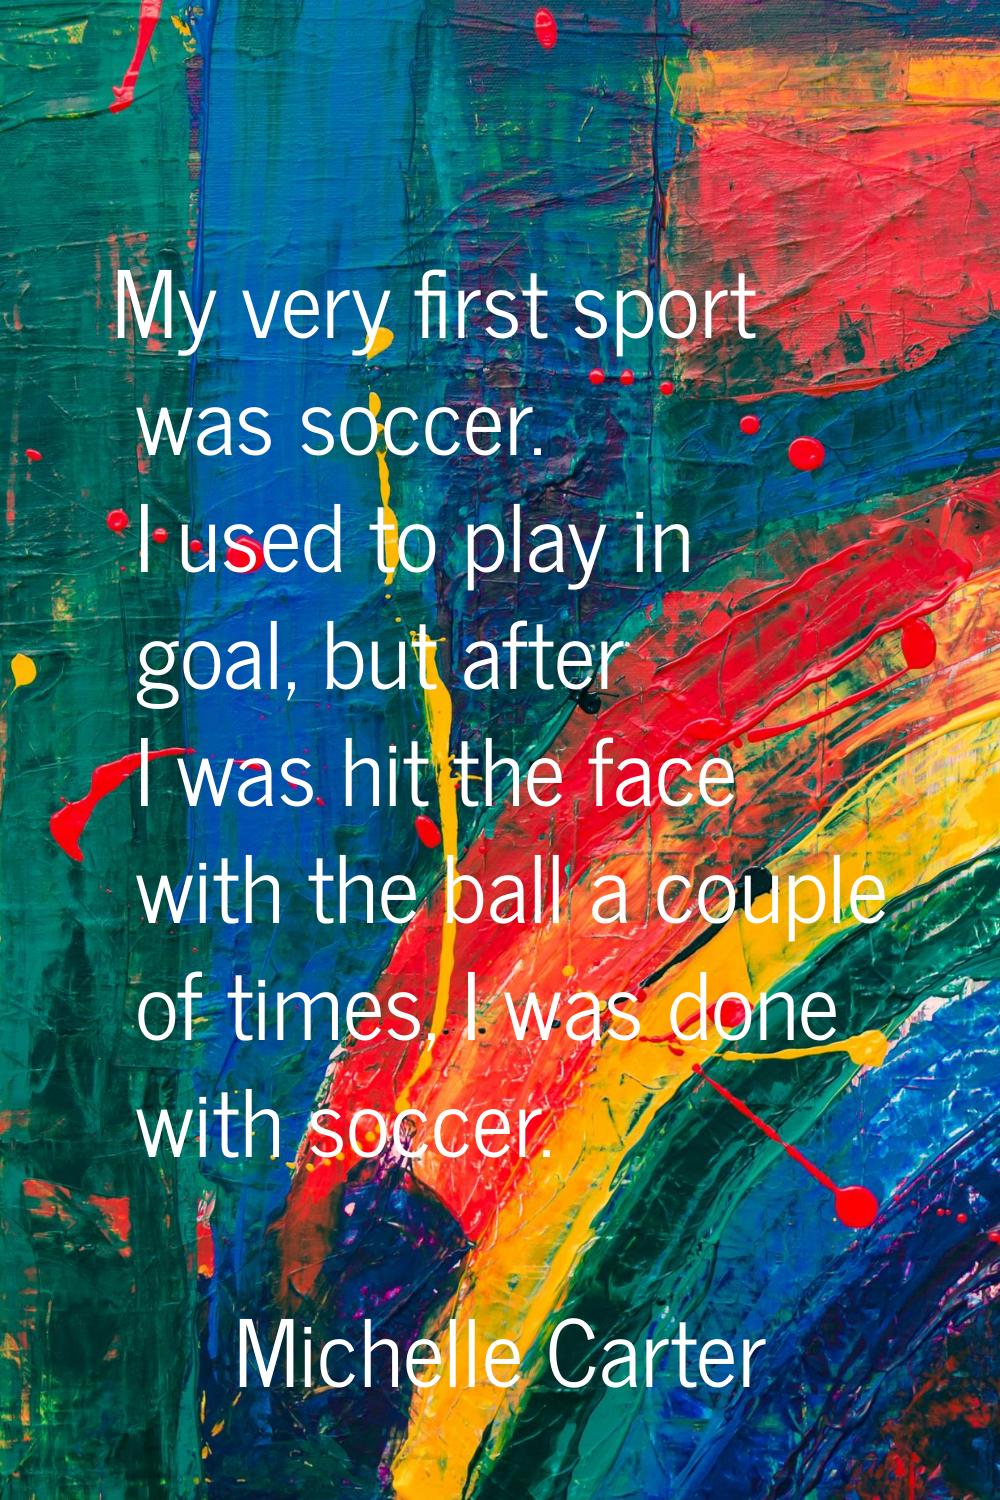 My very first sport was soccer. I used to play in goal, but after I was hit the face with the ball 